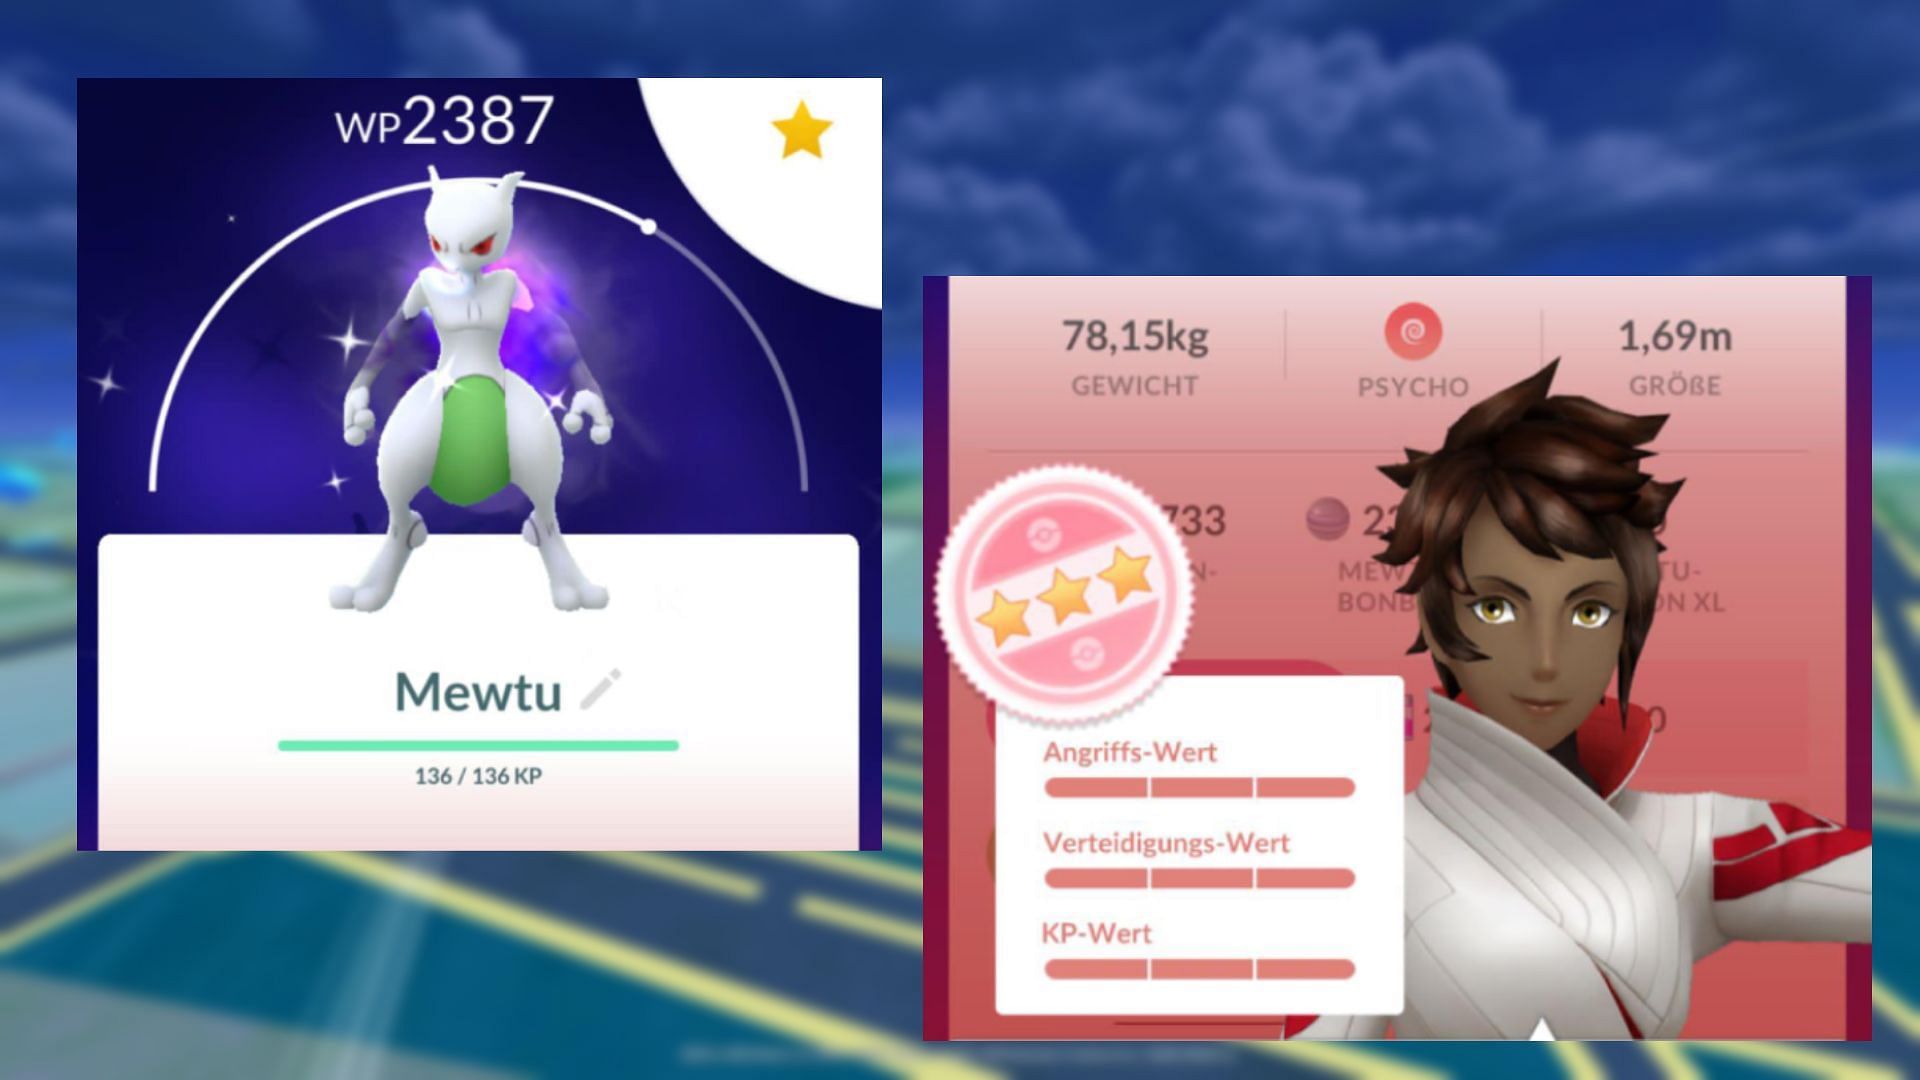 Get yourself a lucky baby to tap for Shiny Mewtwo! She's summoned 4 sh